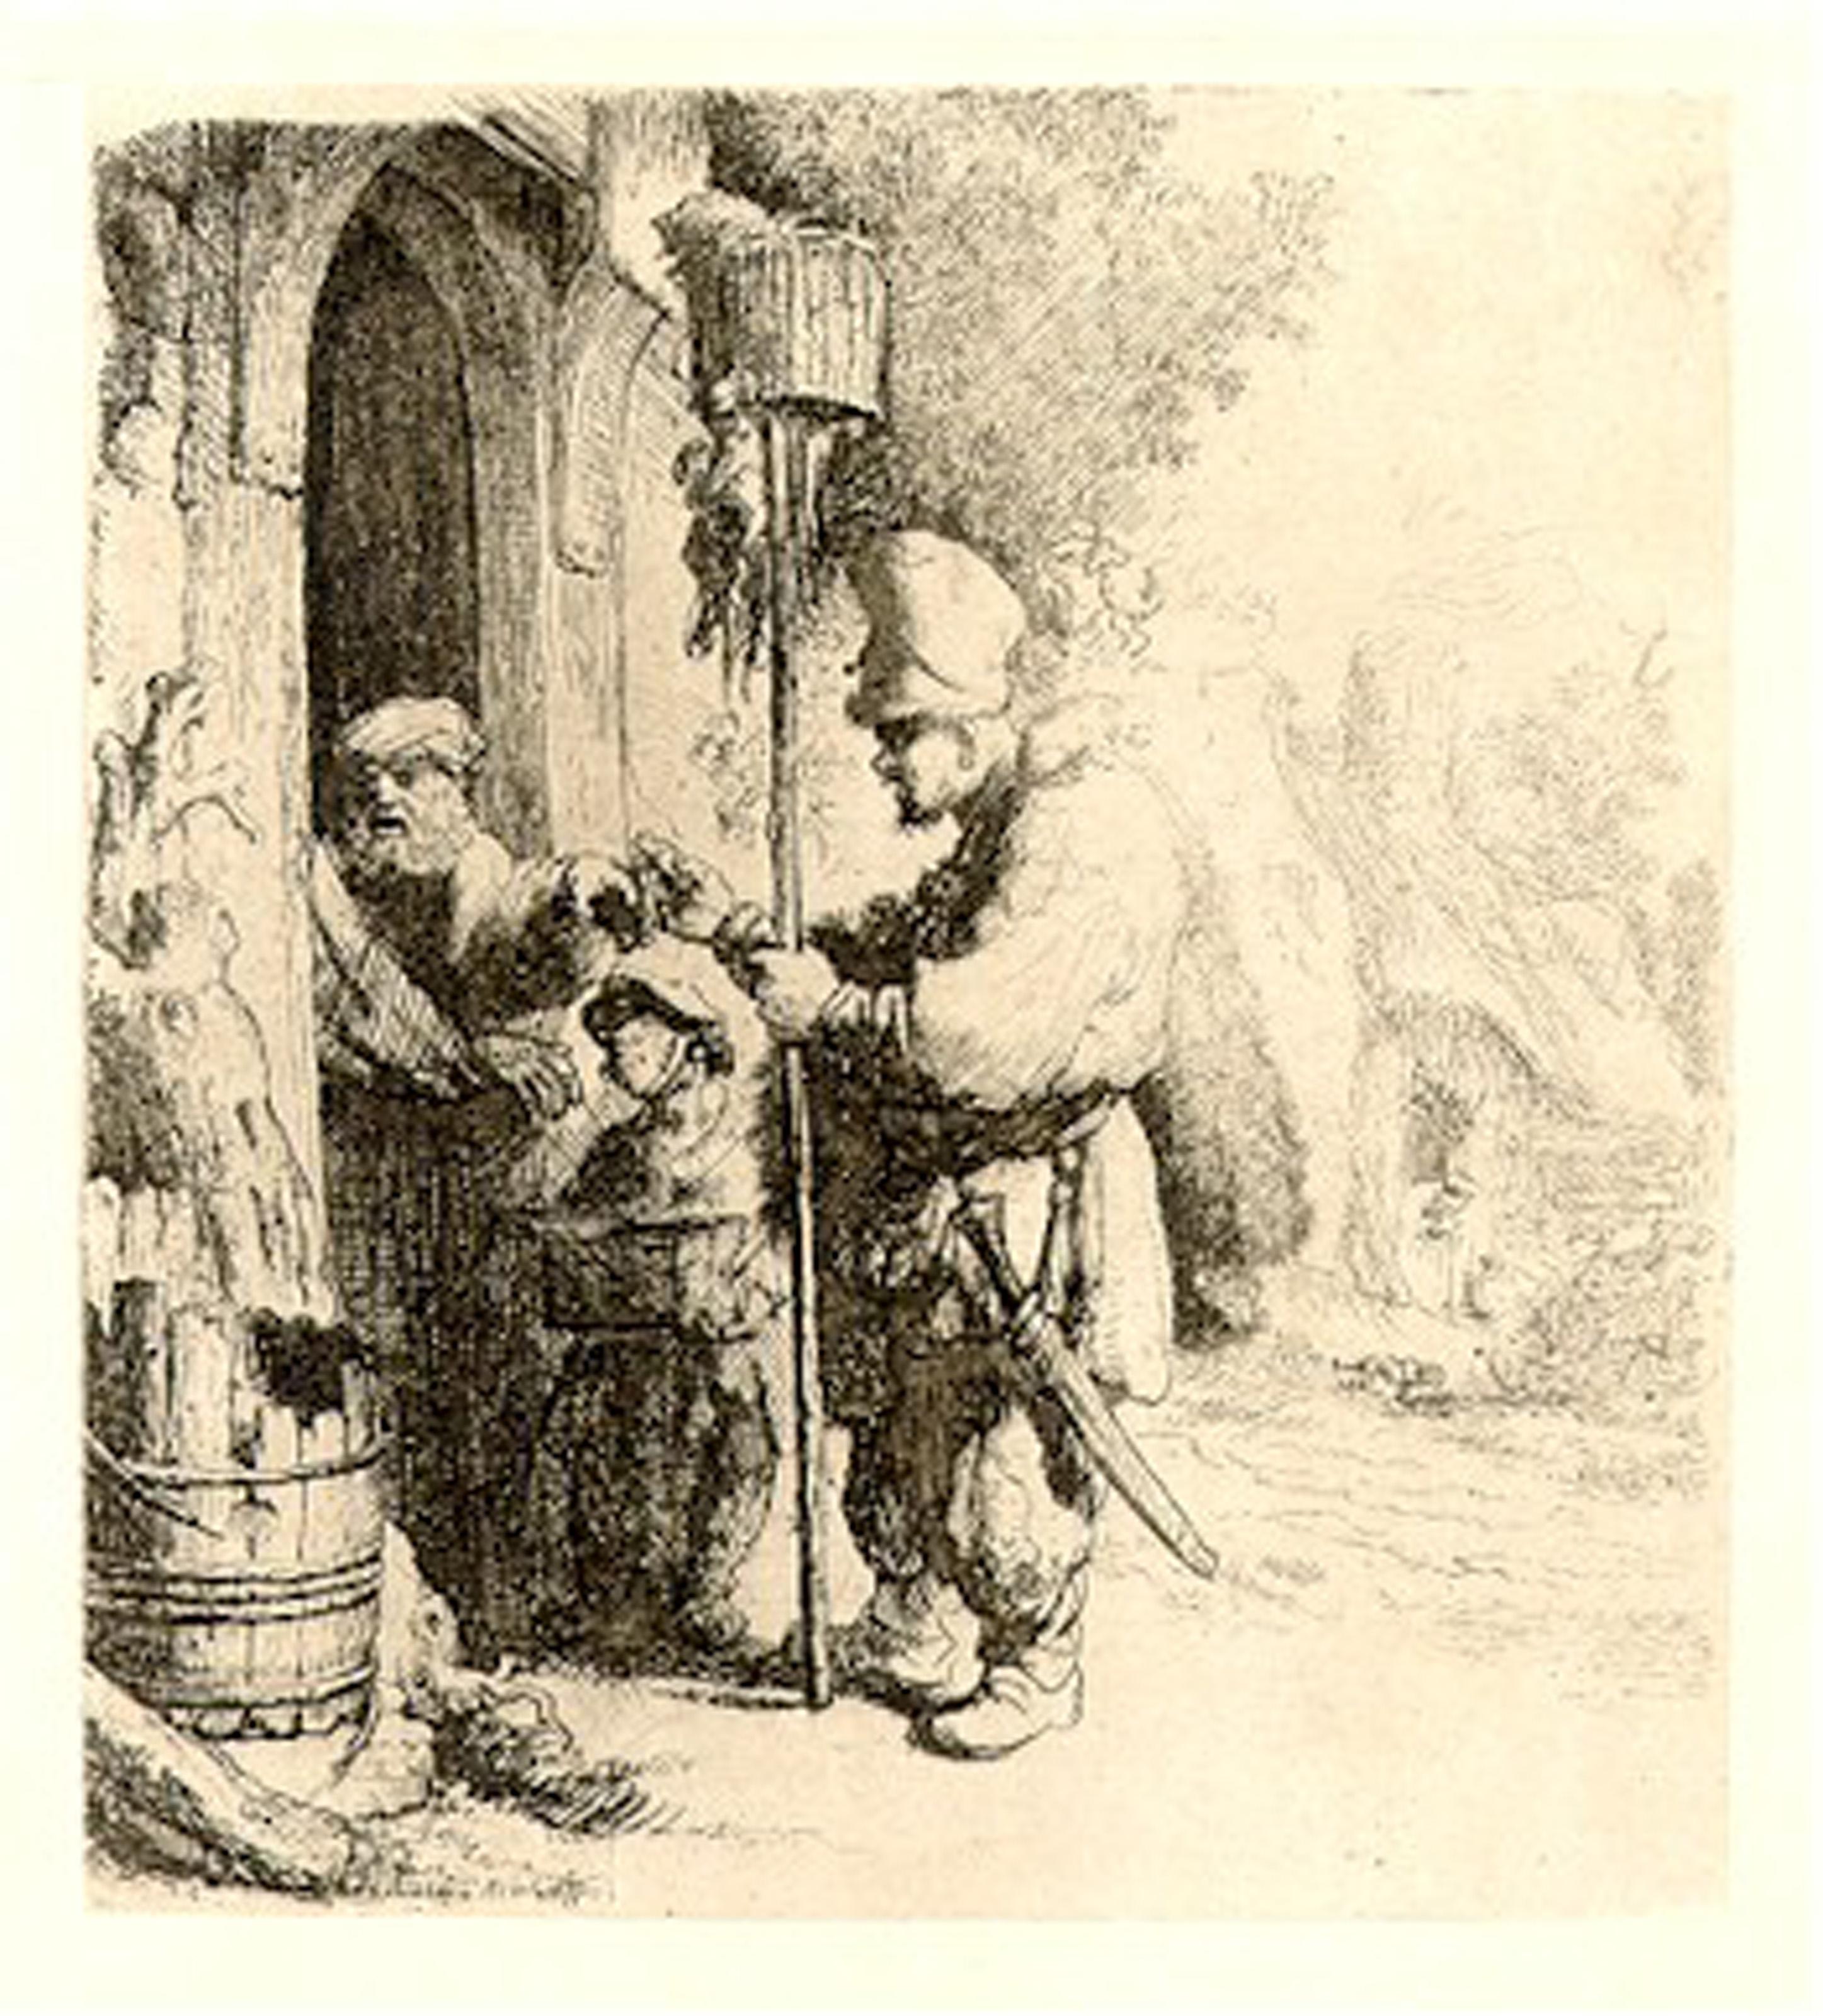  Rembrandt van Rijn, After by Amand Durand, Dutch (1606 - 1669) - The Rat Poison Peddler, Year: Of Original 1632, Medium: Etching, Image Size: 5.5 x 5 inches, Size: 13  x 11 in. (33.02  x 27.94 cm), Printer: Amand Durand, Description: French